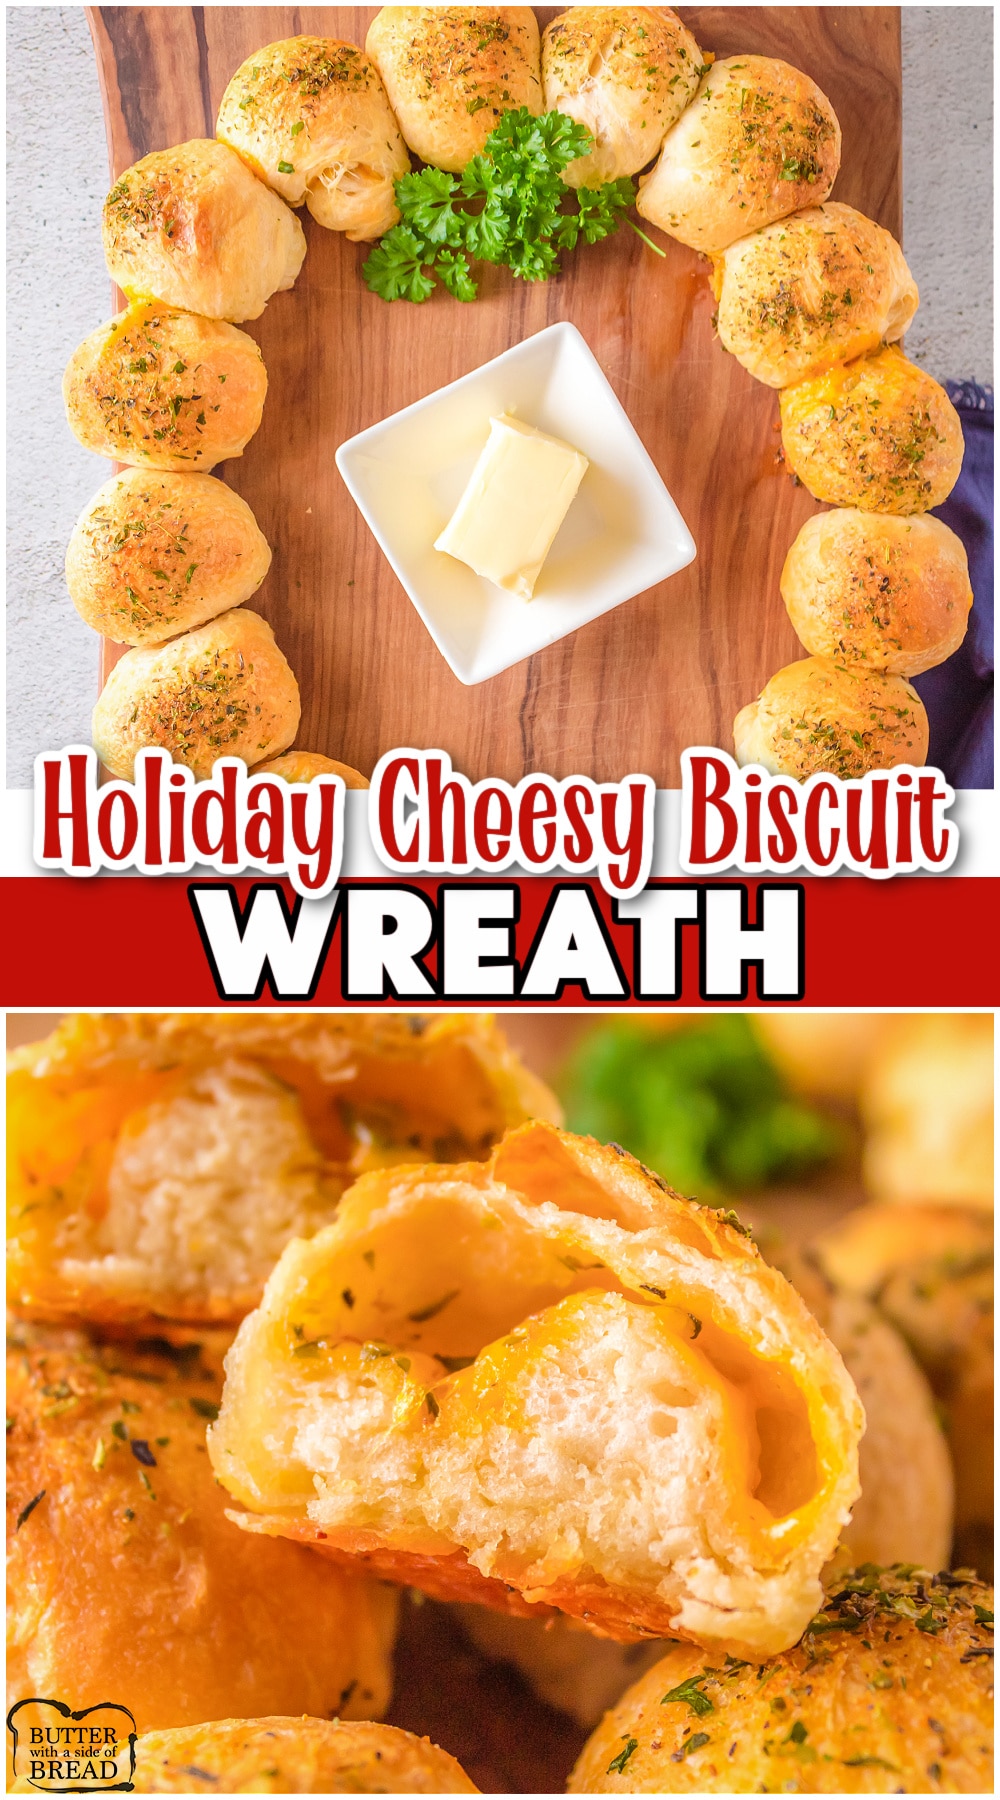 Turn your canned biscuits into an incredible appetizer with this cheesy biscuit wreath. Made with Grands flaky biscuits, cheese, seasonings, and butter, this is an easy & festive way to serve rolls! 